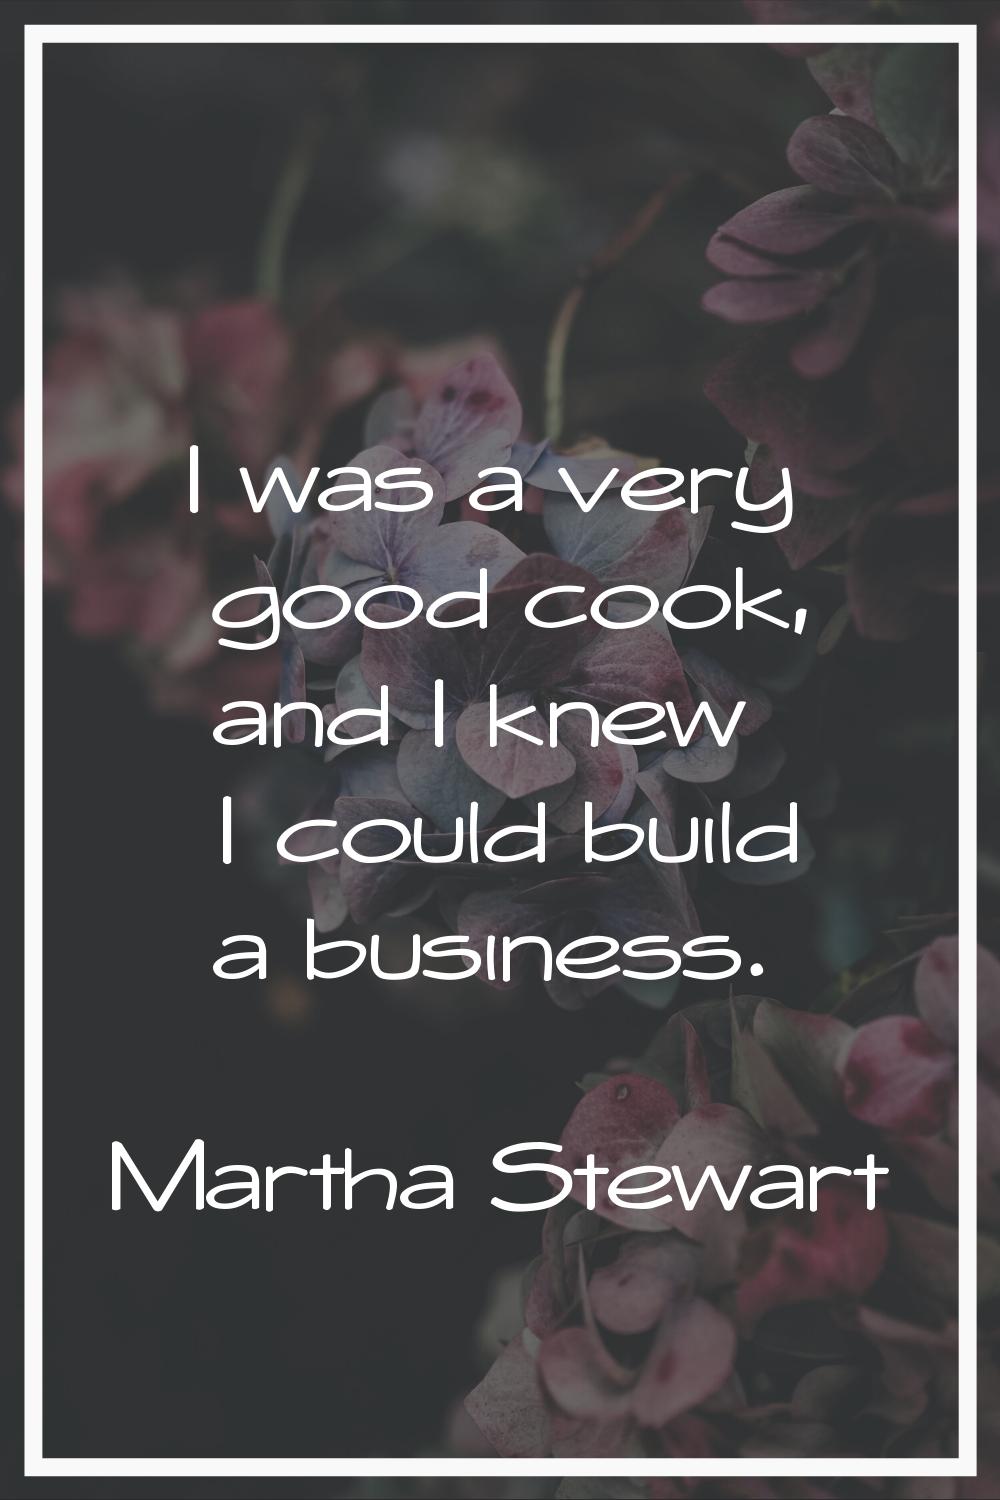 I was a very good cook, and I knew I could build a business.